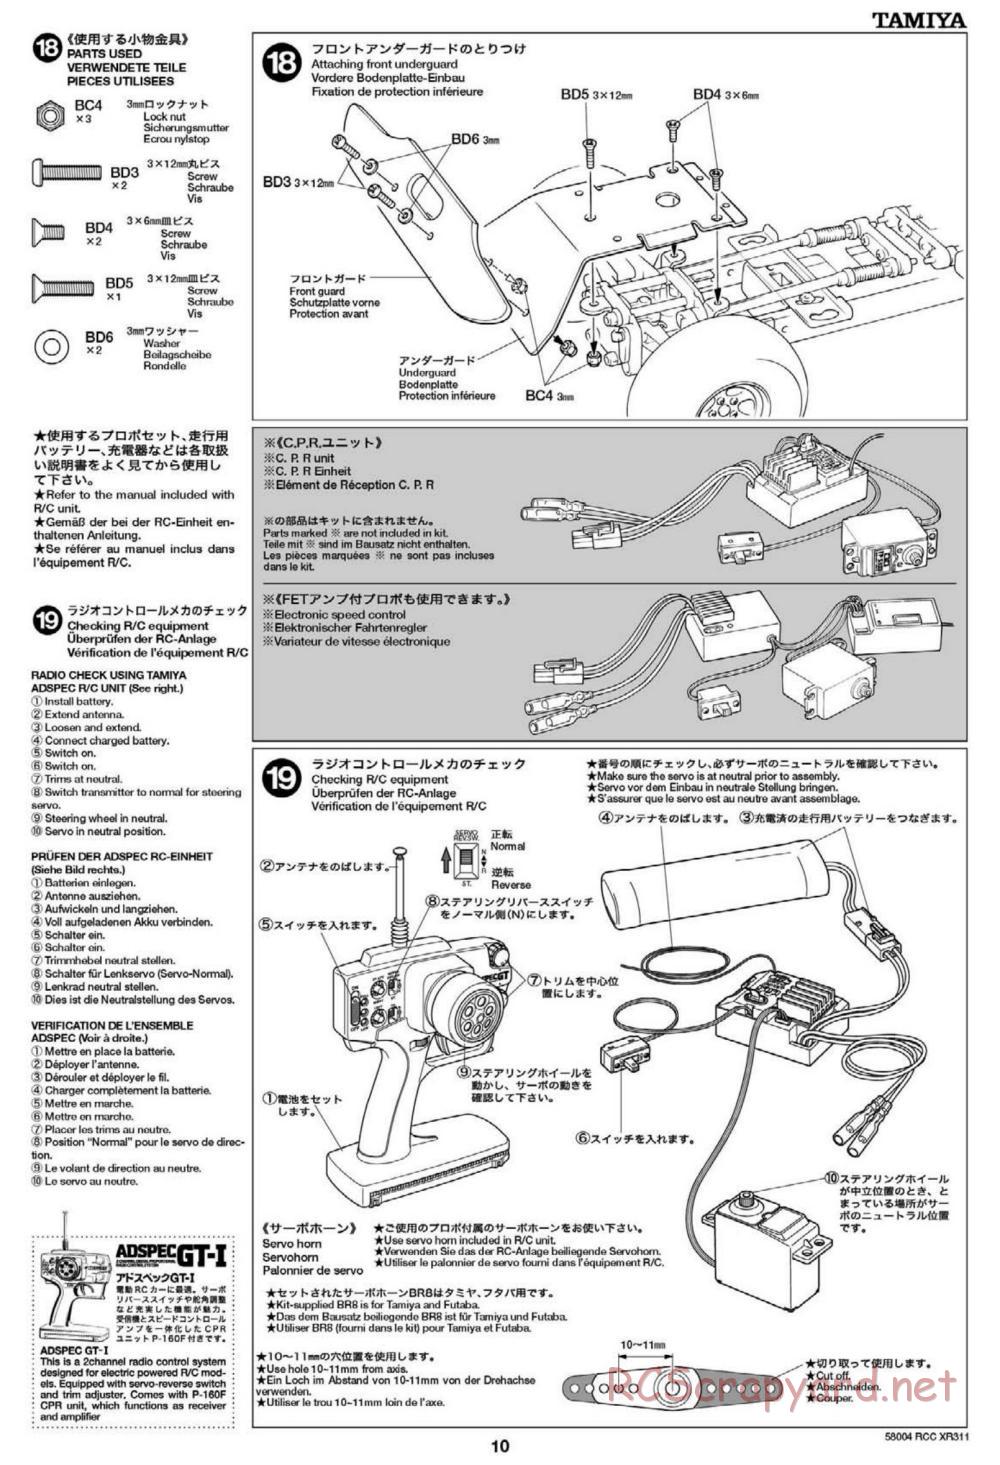 Tamiya - XR311 Combat Support Vehicle (2012) Chassis - Manual - Page 10